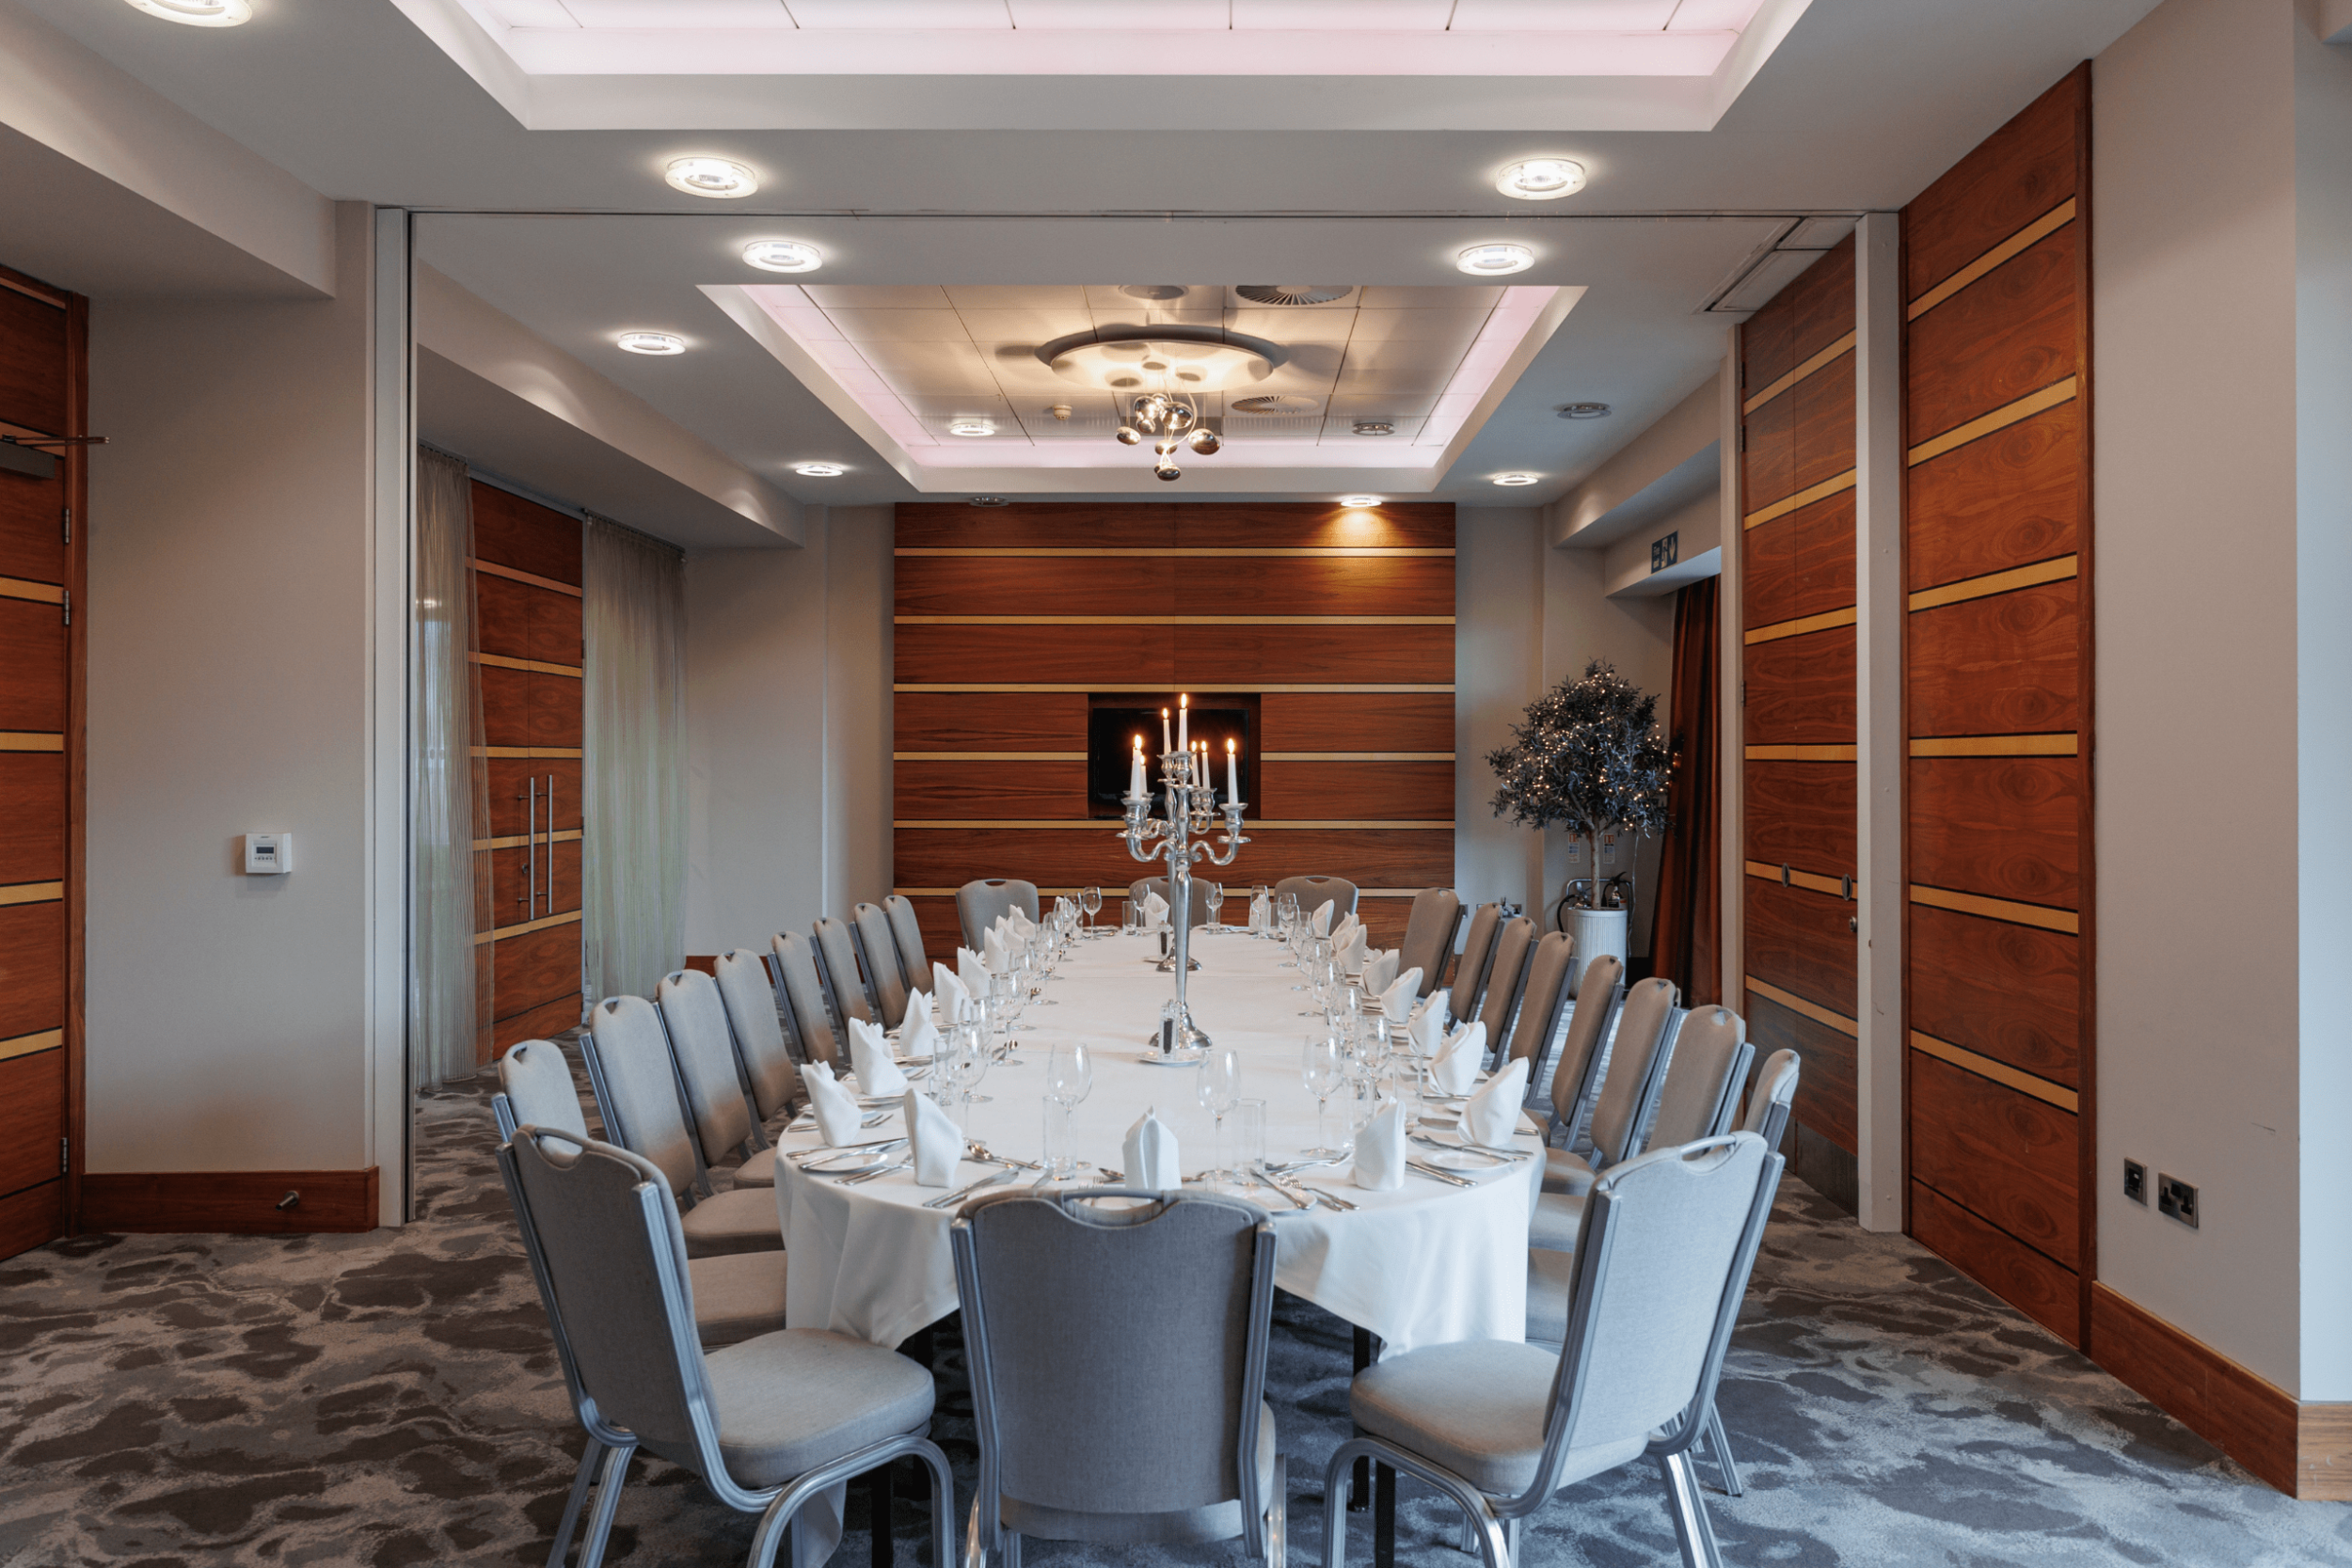 Valencia Suite Corporate dining and events Chesterfield, Casa Hotel conferencing and meeting space.